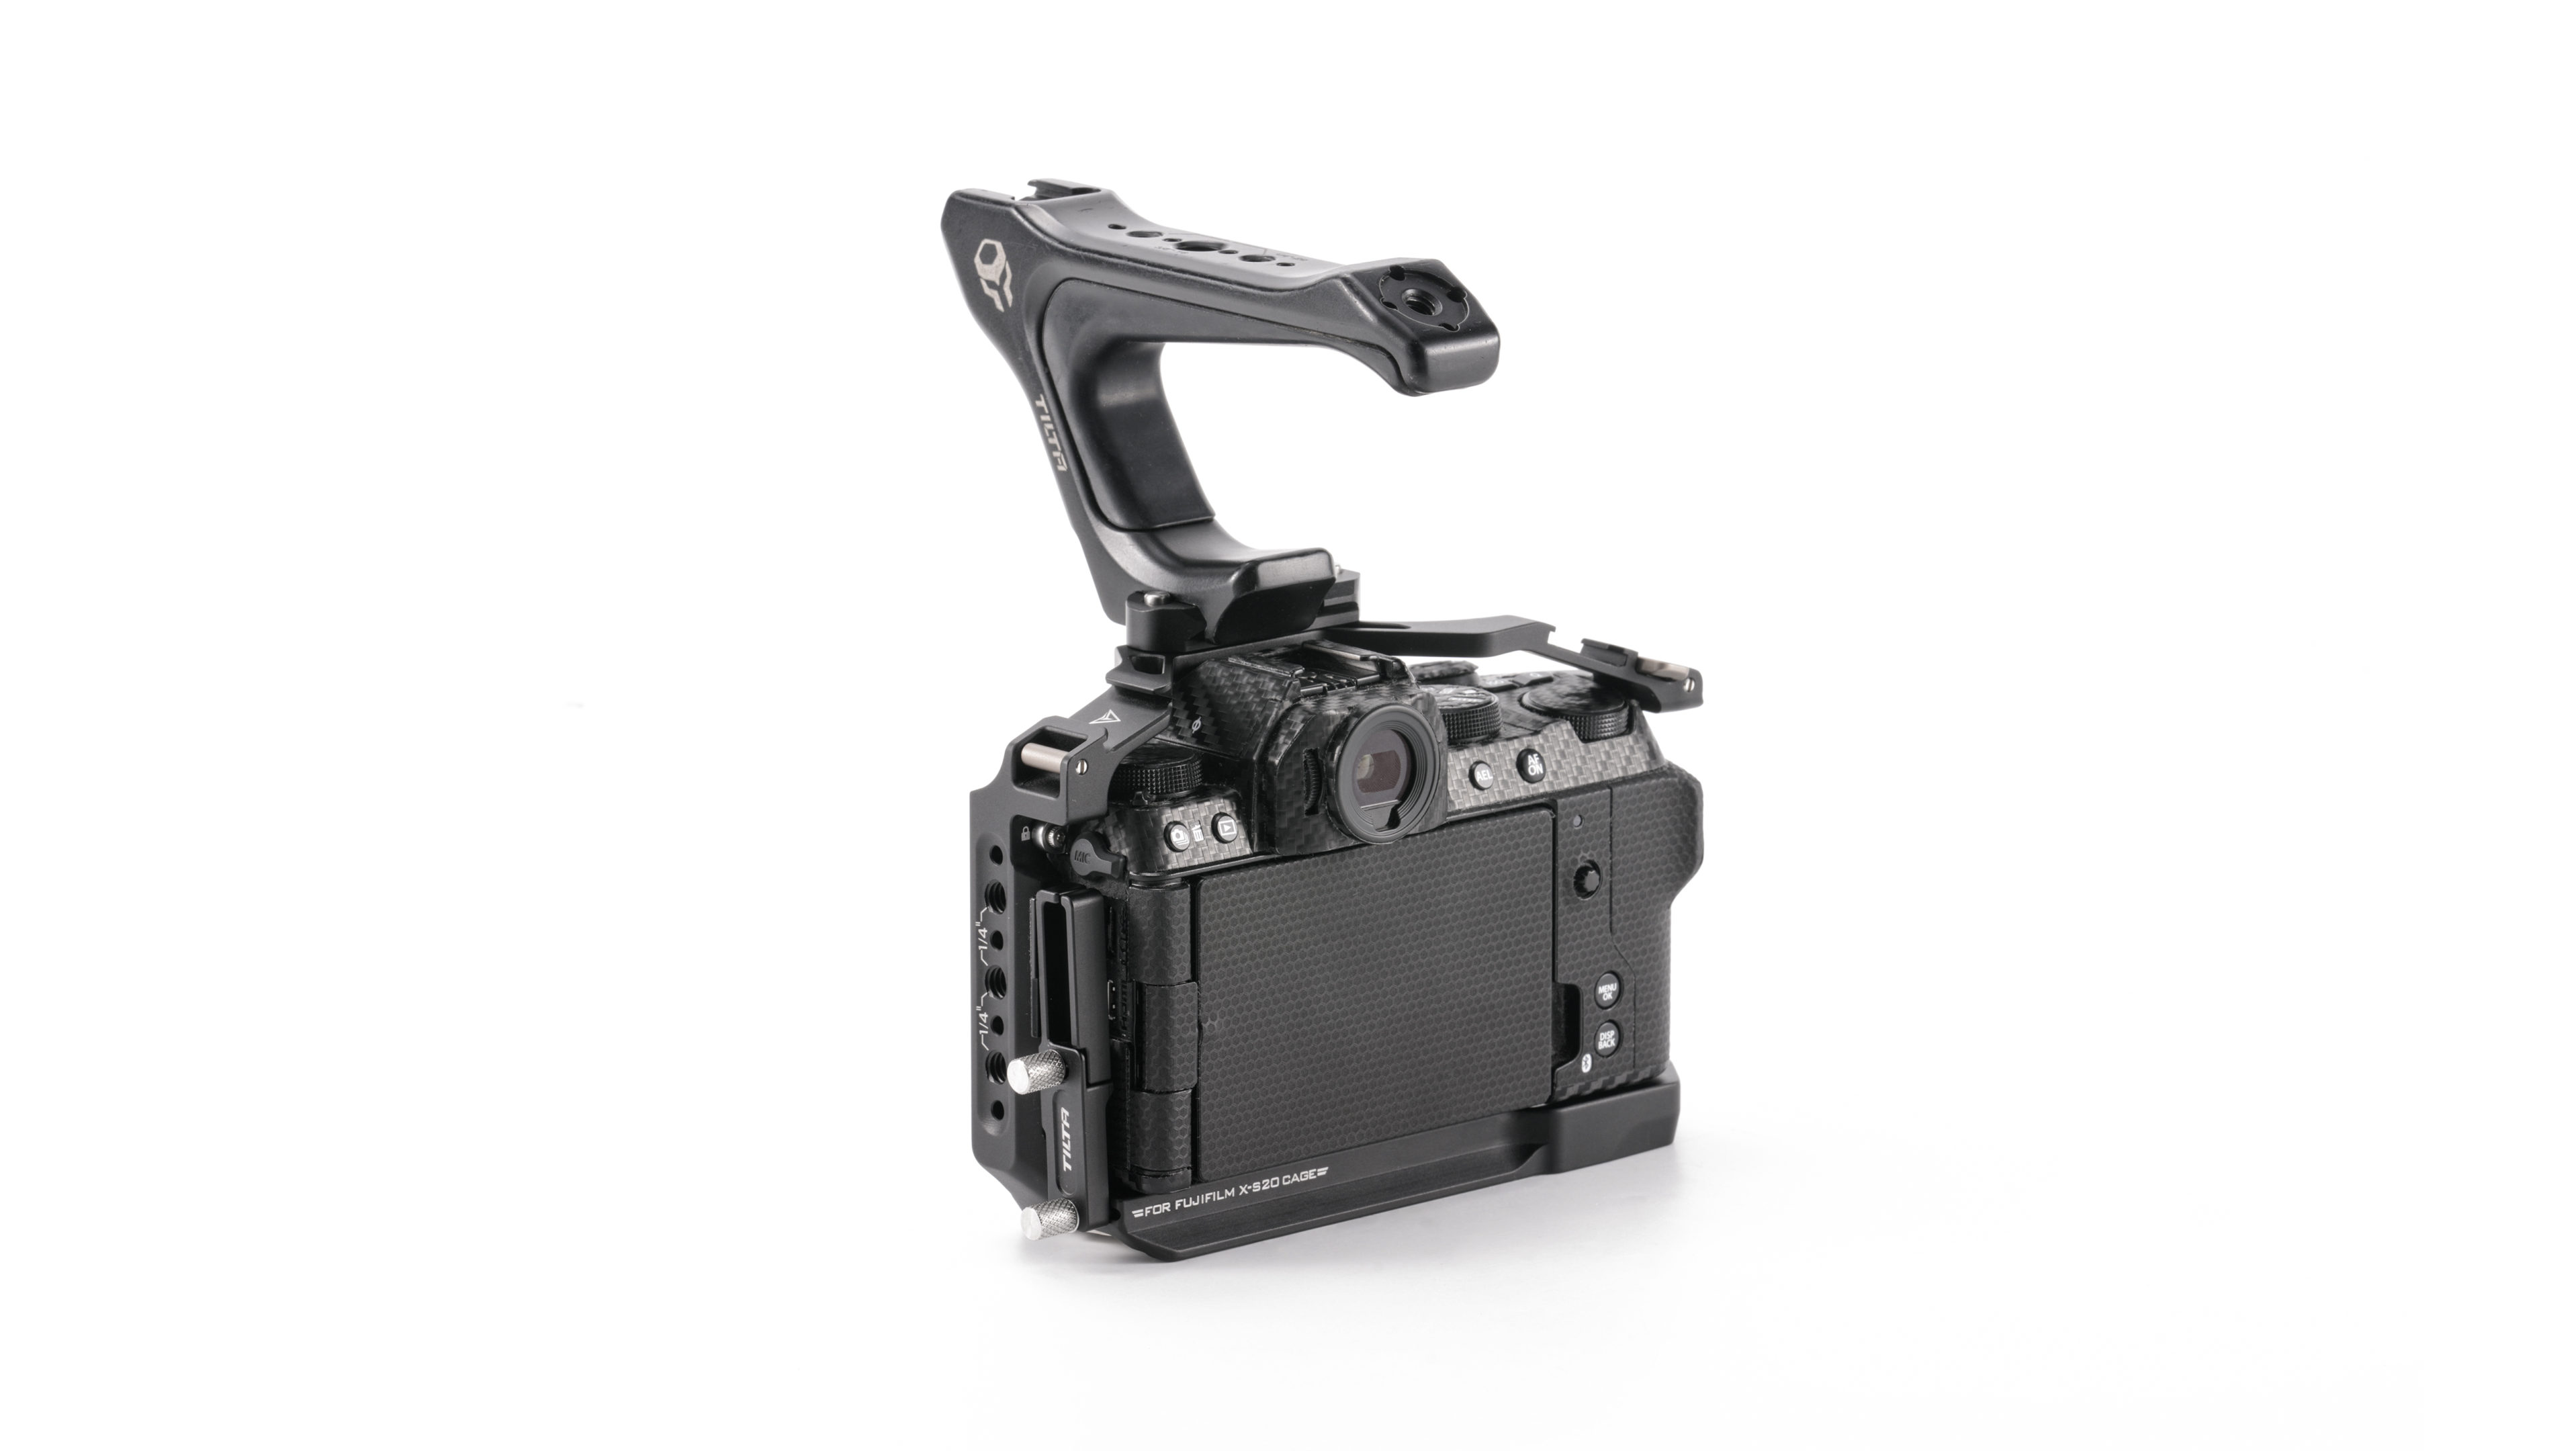  SmallRig X-S20 Camera Cage for FUJIFILM X-S20, Aluminium Alloy  Full Cage, w/Quick Release Plate for Arca-Swiss, for Photography, Shooting,  Video Creators - 4230 : Electronics